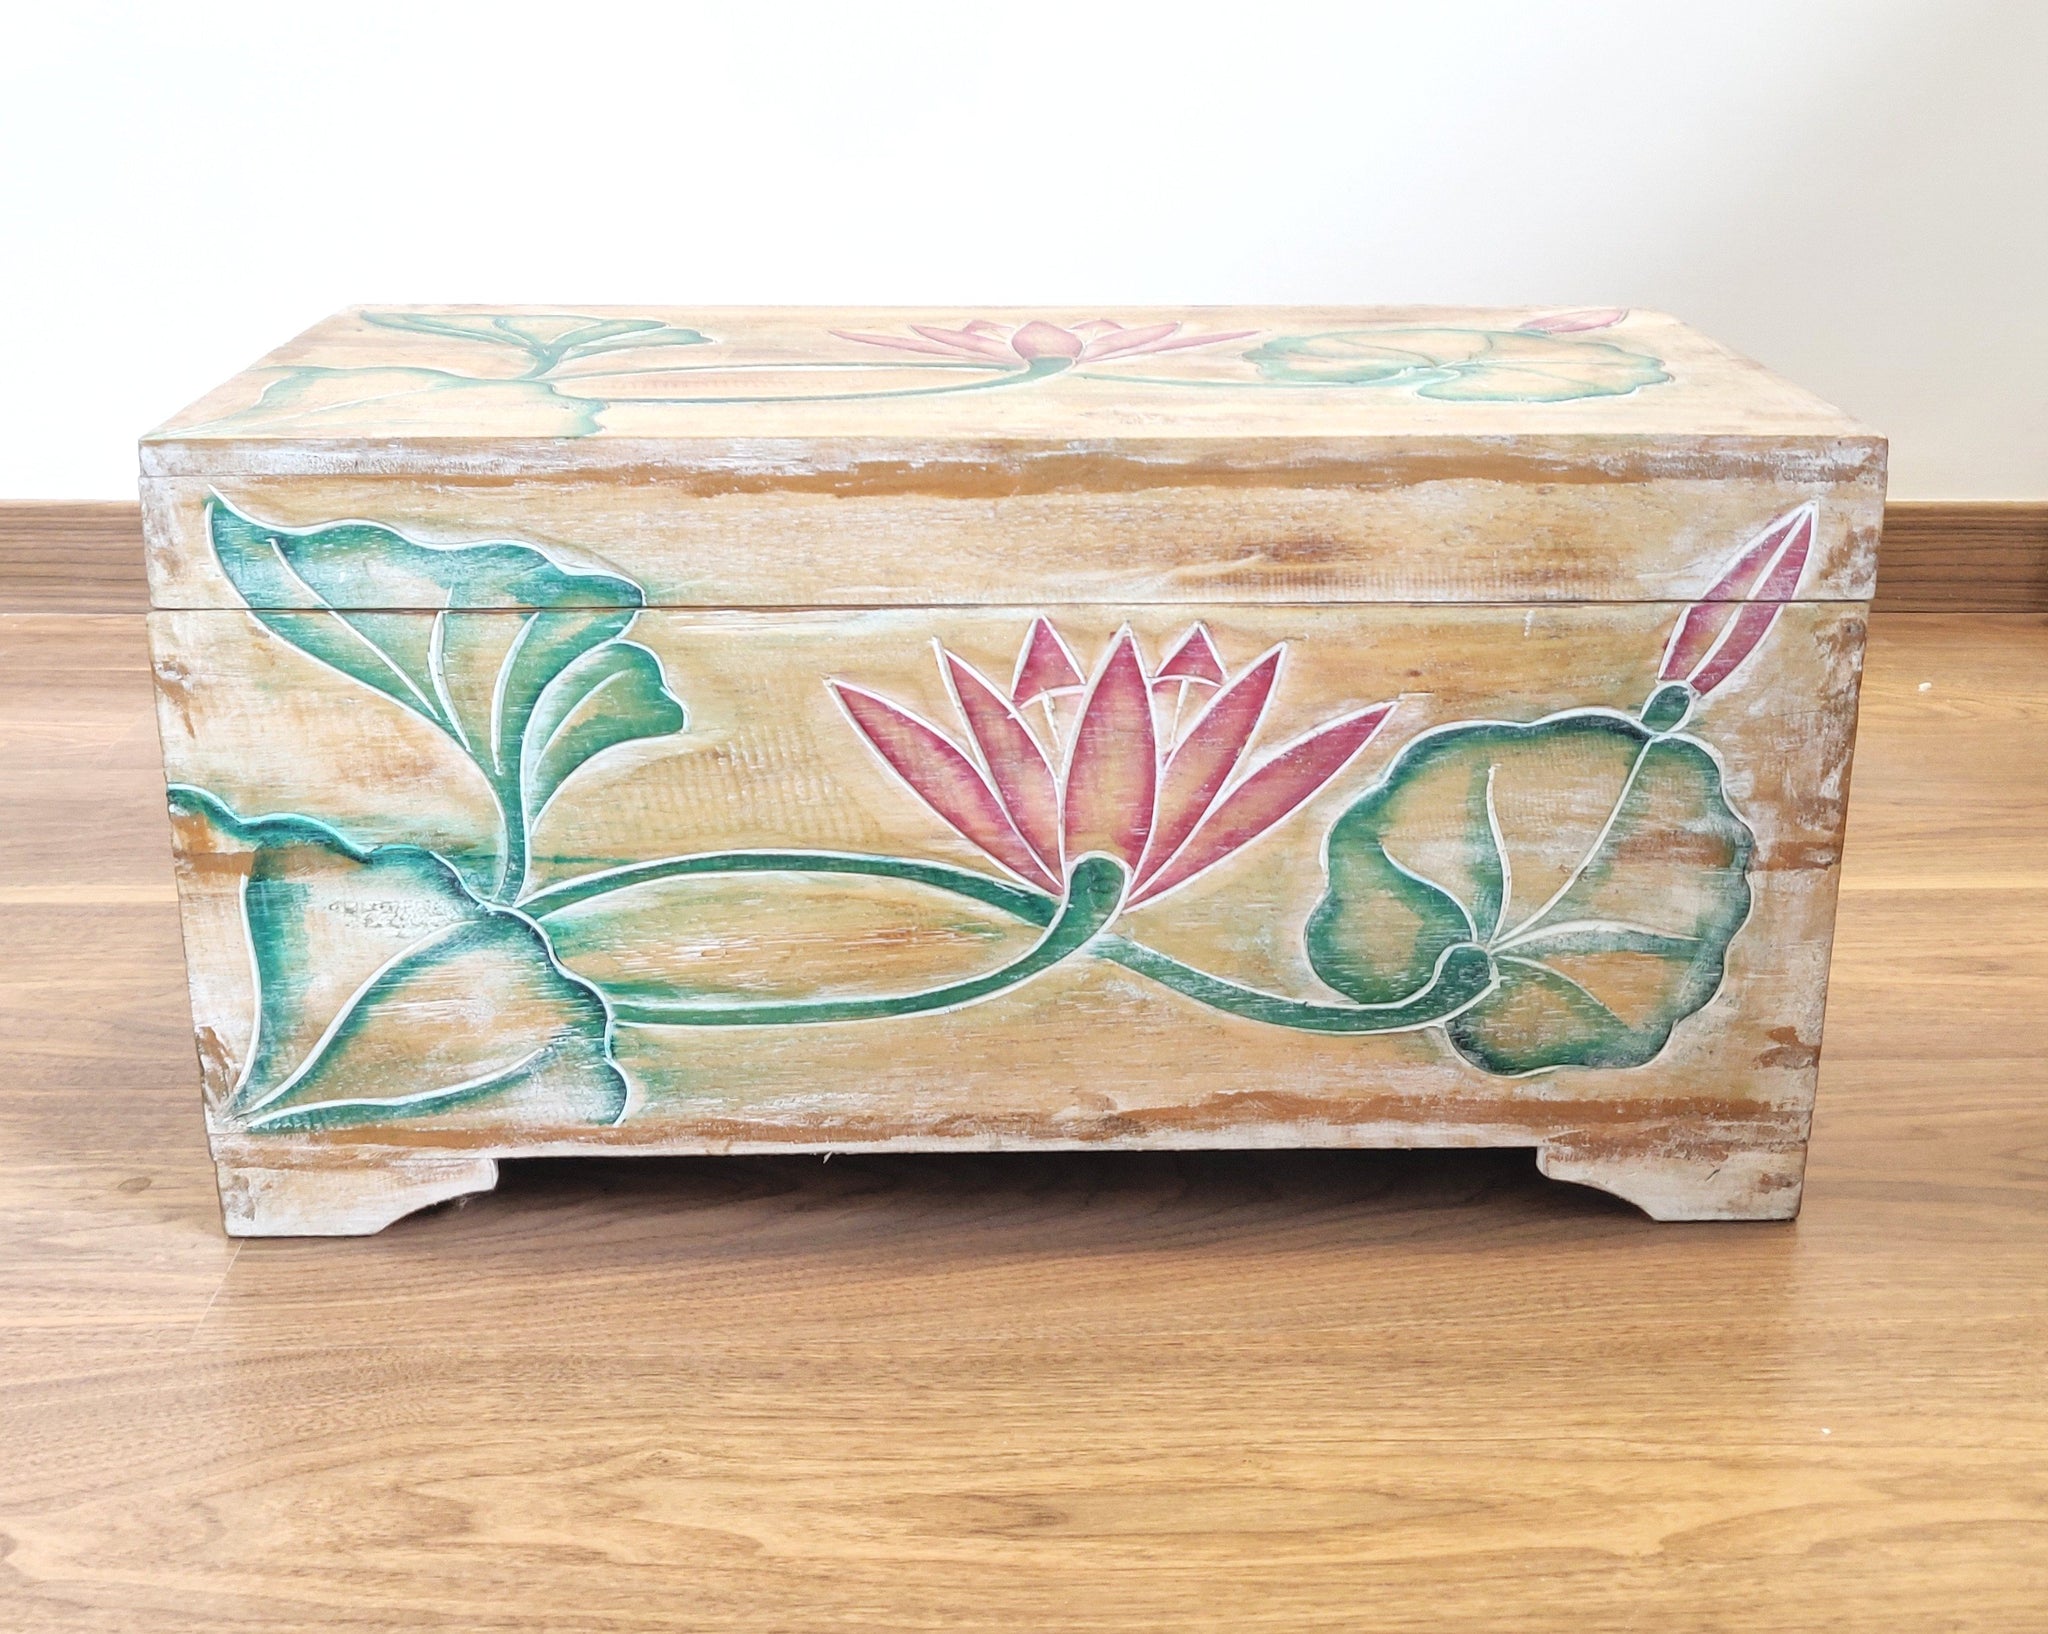 Bill Long Decorative Box For Sale at 1stDibs